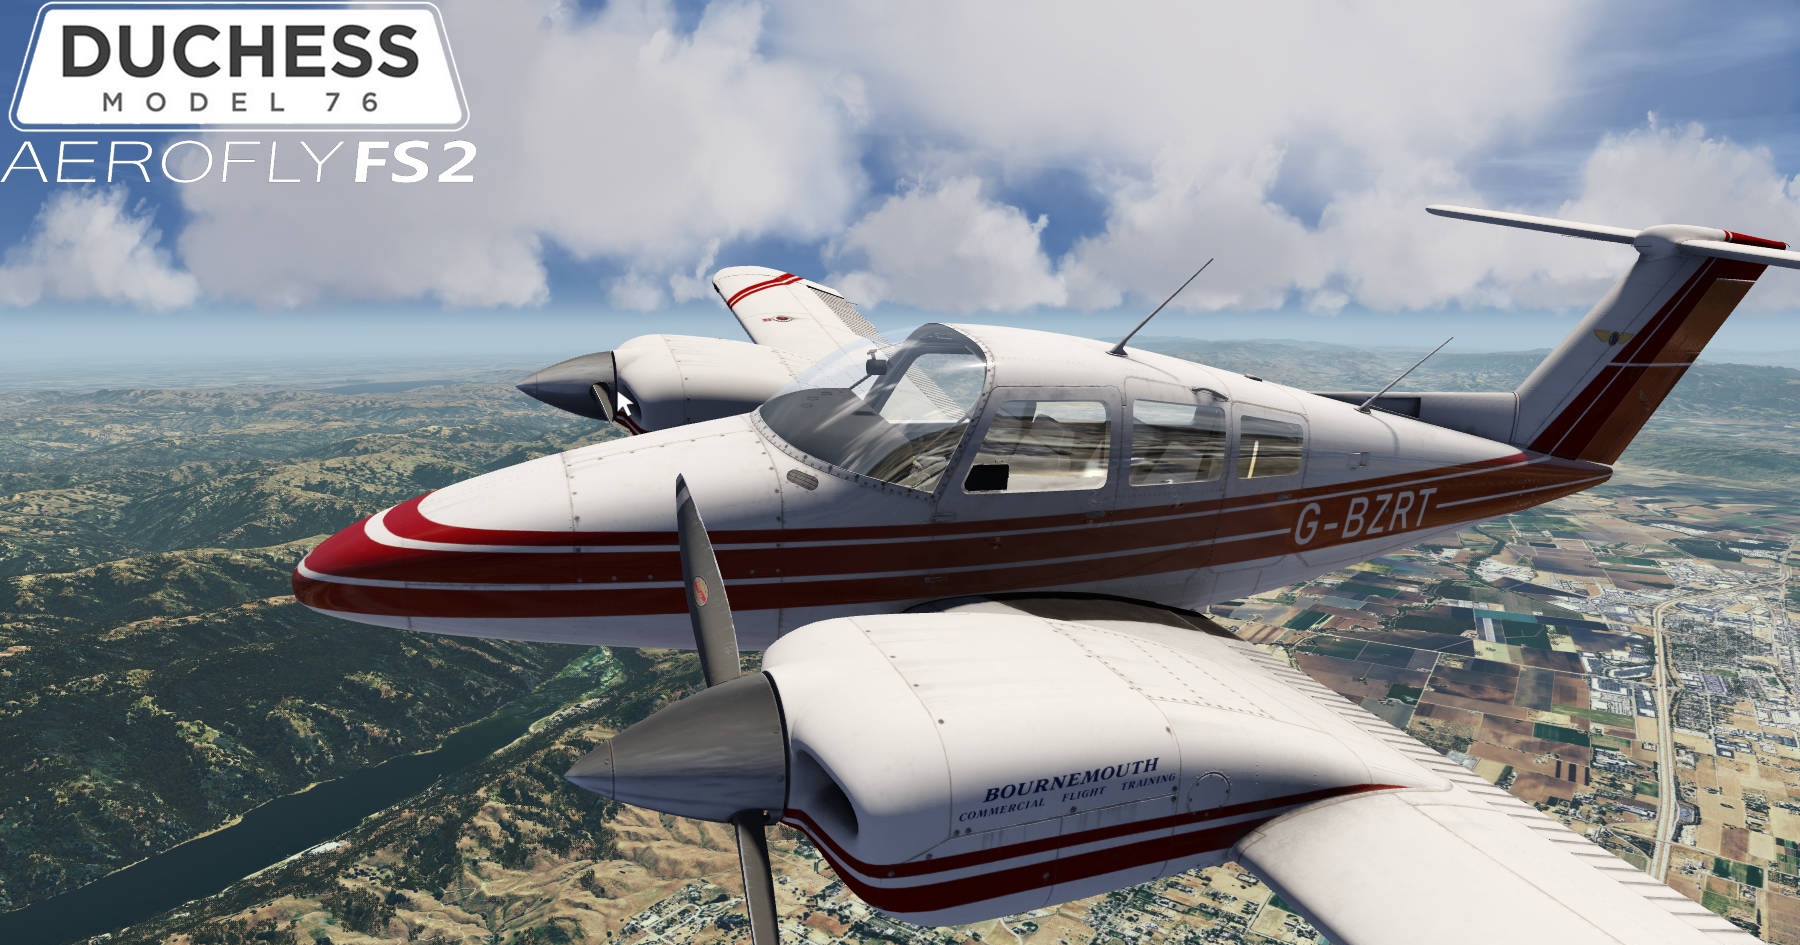 The Just Flight Duchess Model 76 is also coming to Aerofly FS 2